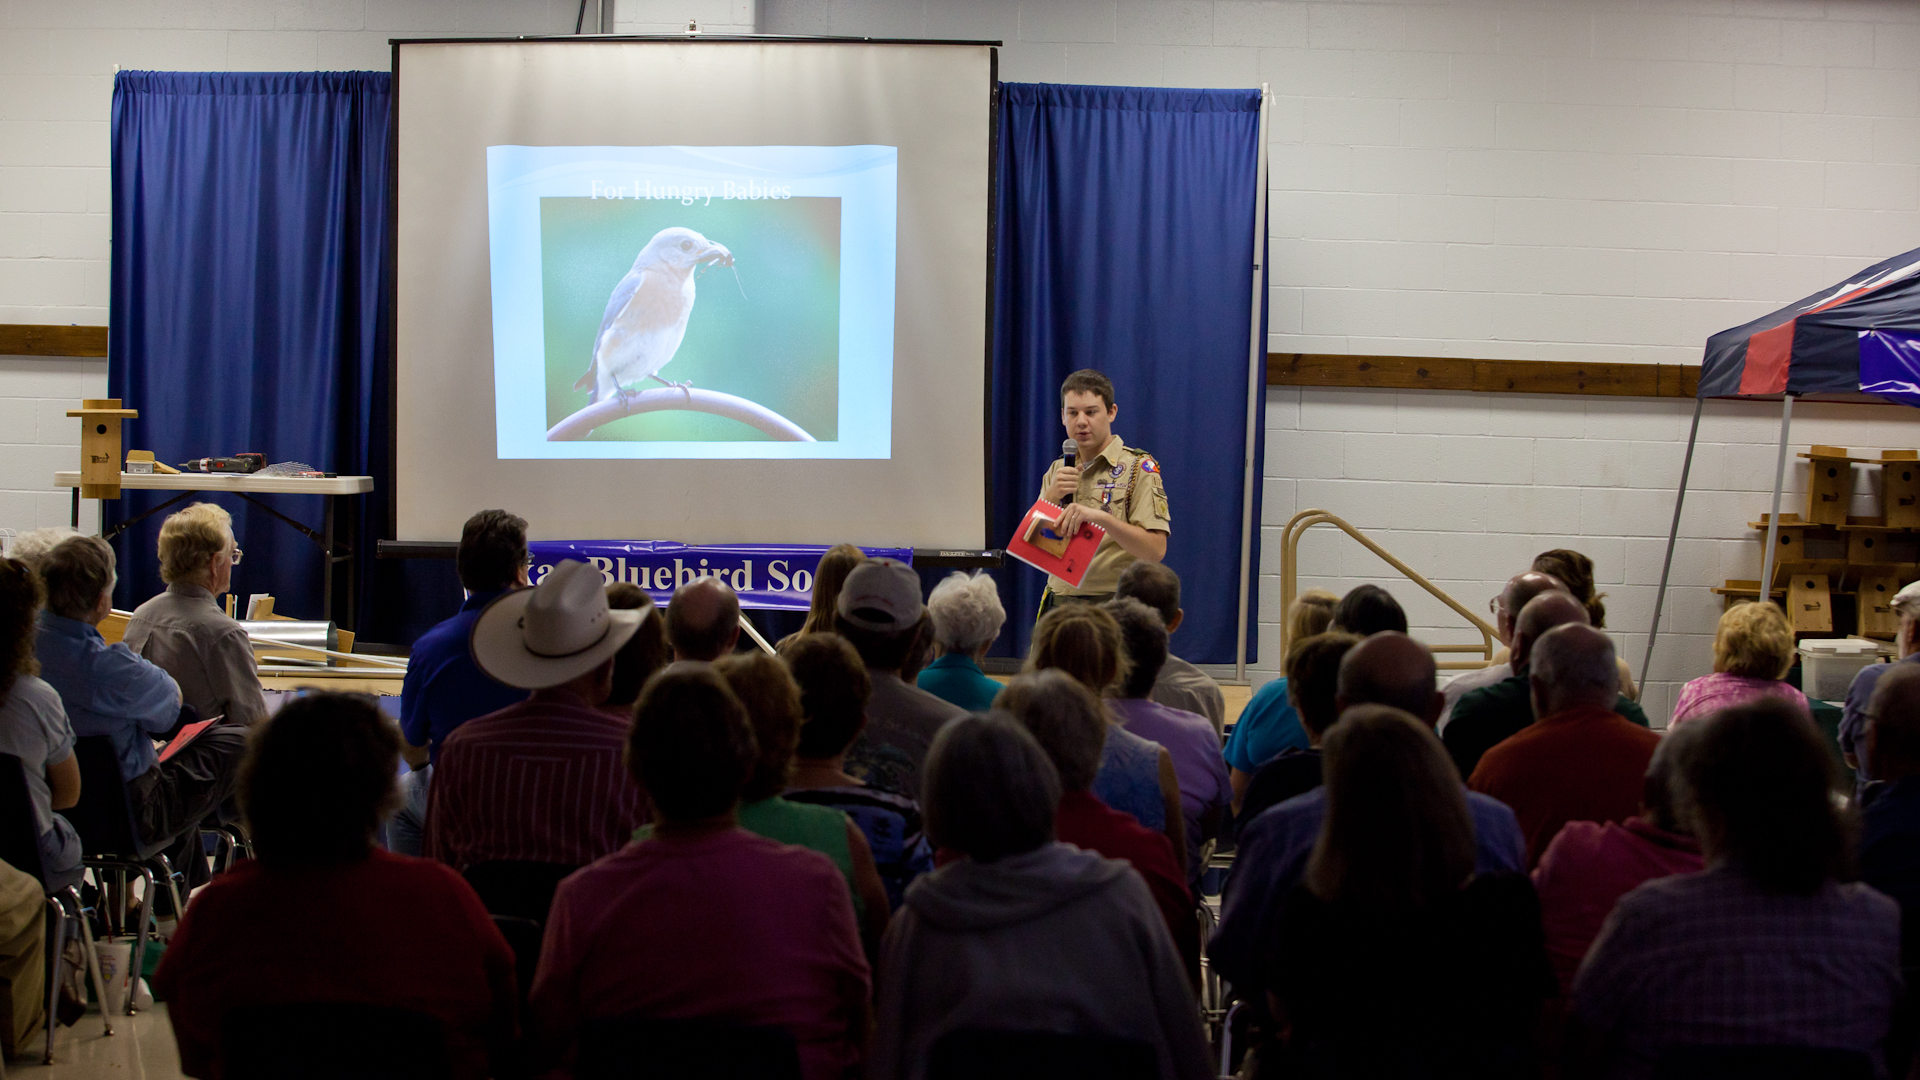 William T. Hornaday Conservation Award Winner and Eagle Scout delivering informative speech about the importance of nest-boxes and promoting the interests of the Texas Bluebird Society at their 10th Annual Meeting and Convention in Glen Rose, Texas on August 20, 2011. TBS is an active interest group advocating on behalf of the protection of Eastern Bluebirds and their habitat.